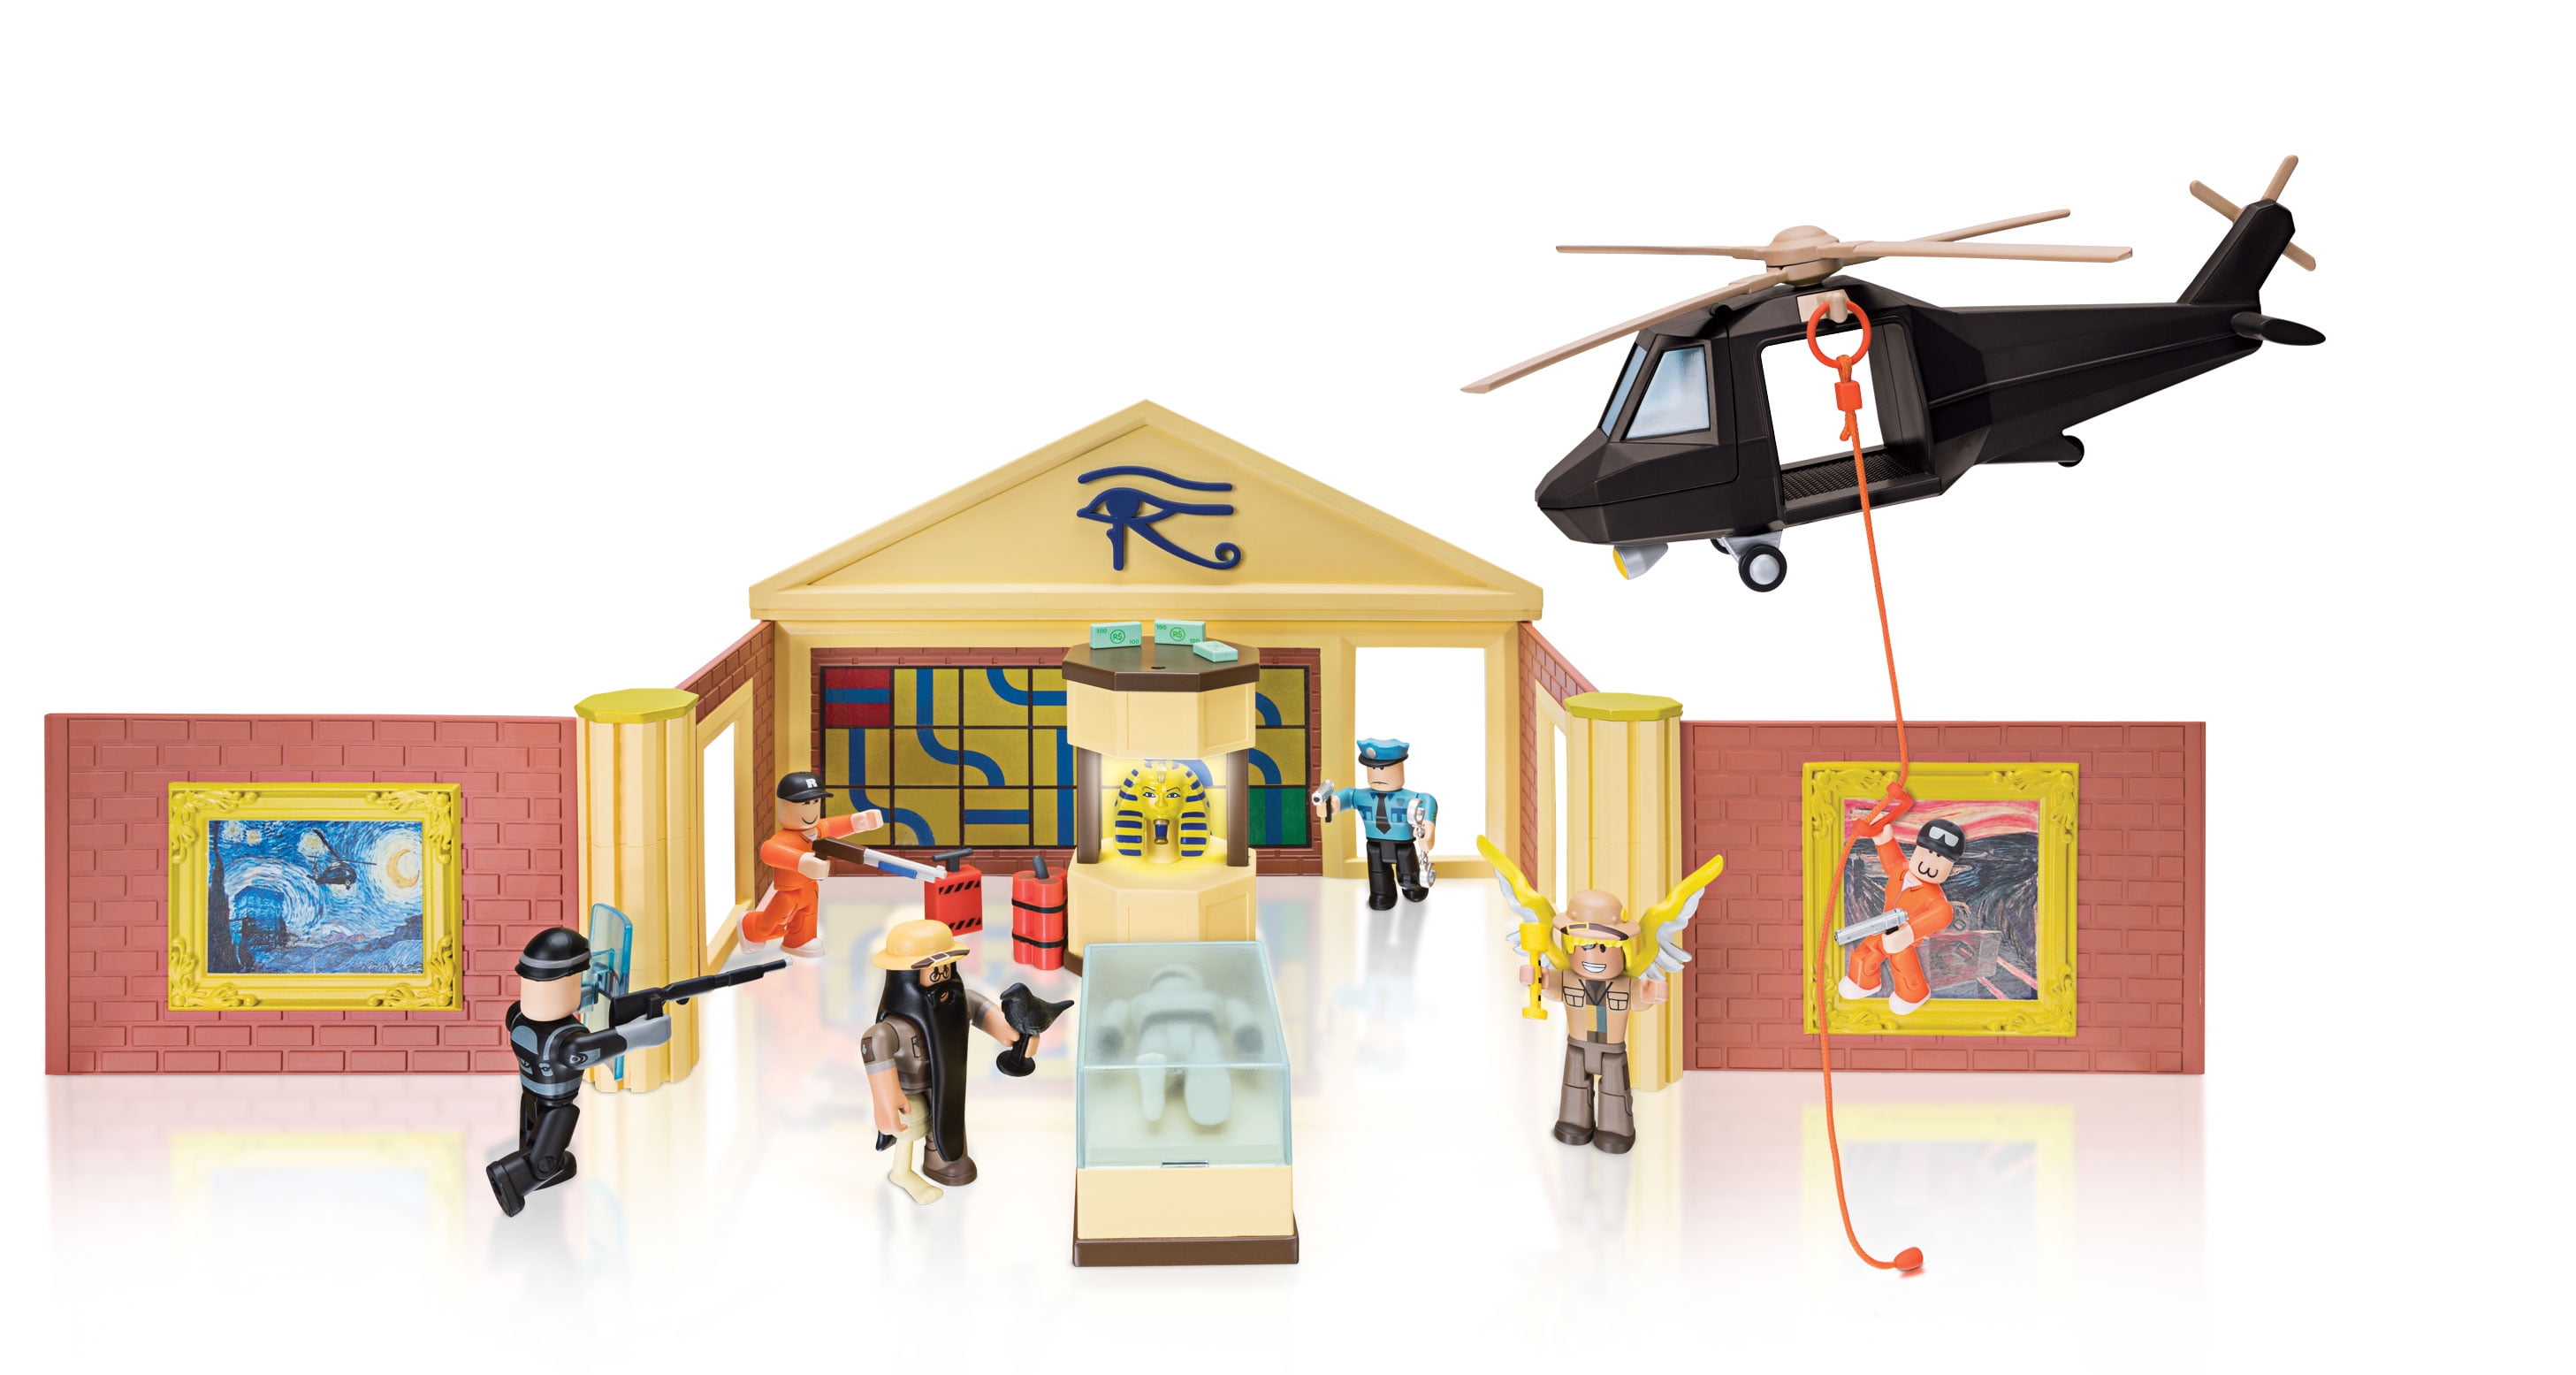 Roblox Action Collection Jailbreak Museum Heist Covert Ops Edition Playset Includes Two Exclusive Virtual Items Walmart Com Walmart Com - roblox deluxe playset jailbreak museum heist